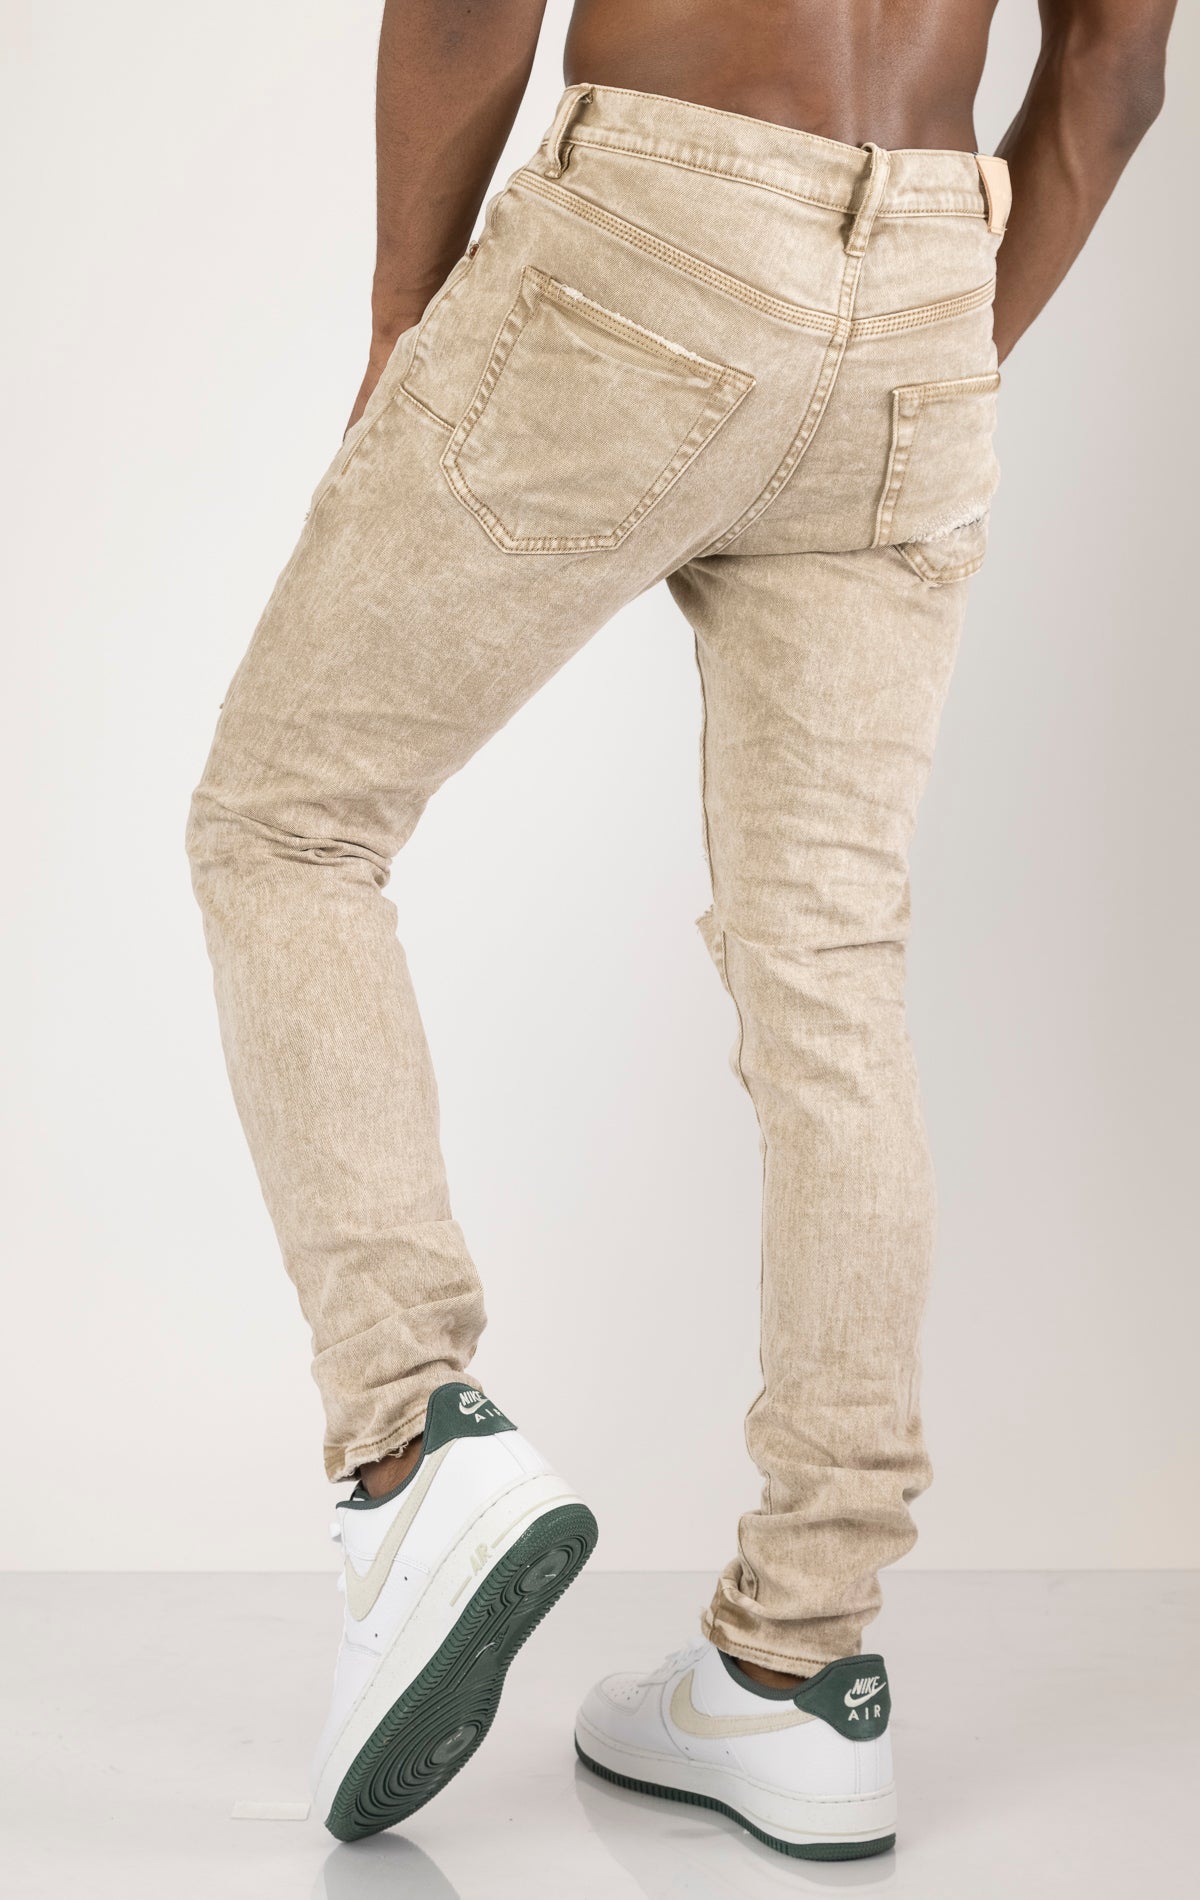 Beige Skinny Jeans with a contrasting plaid patch. Made from 98% cotton and 2% lycra. Features include a signature purple hangtag, lined back pockets and yoke for comfort and shape retention, reinforced belt loops, hidden back pocket rivets, and a classic button fly closure.  Please note: Due to the individual hand-finishing process, slight variations may occur, making each pair one-of-a-kind.